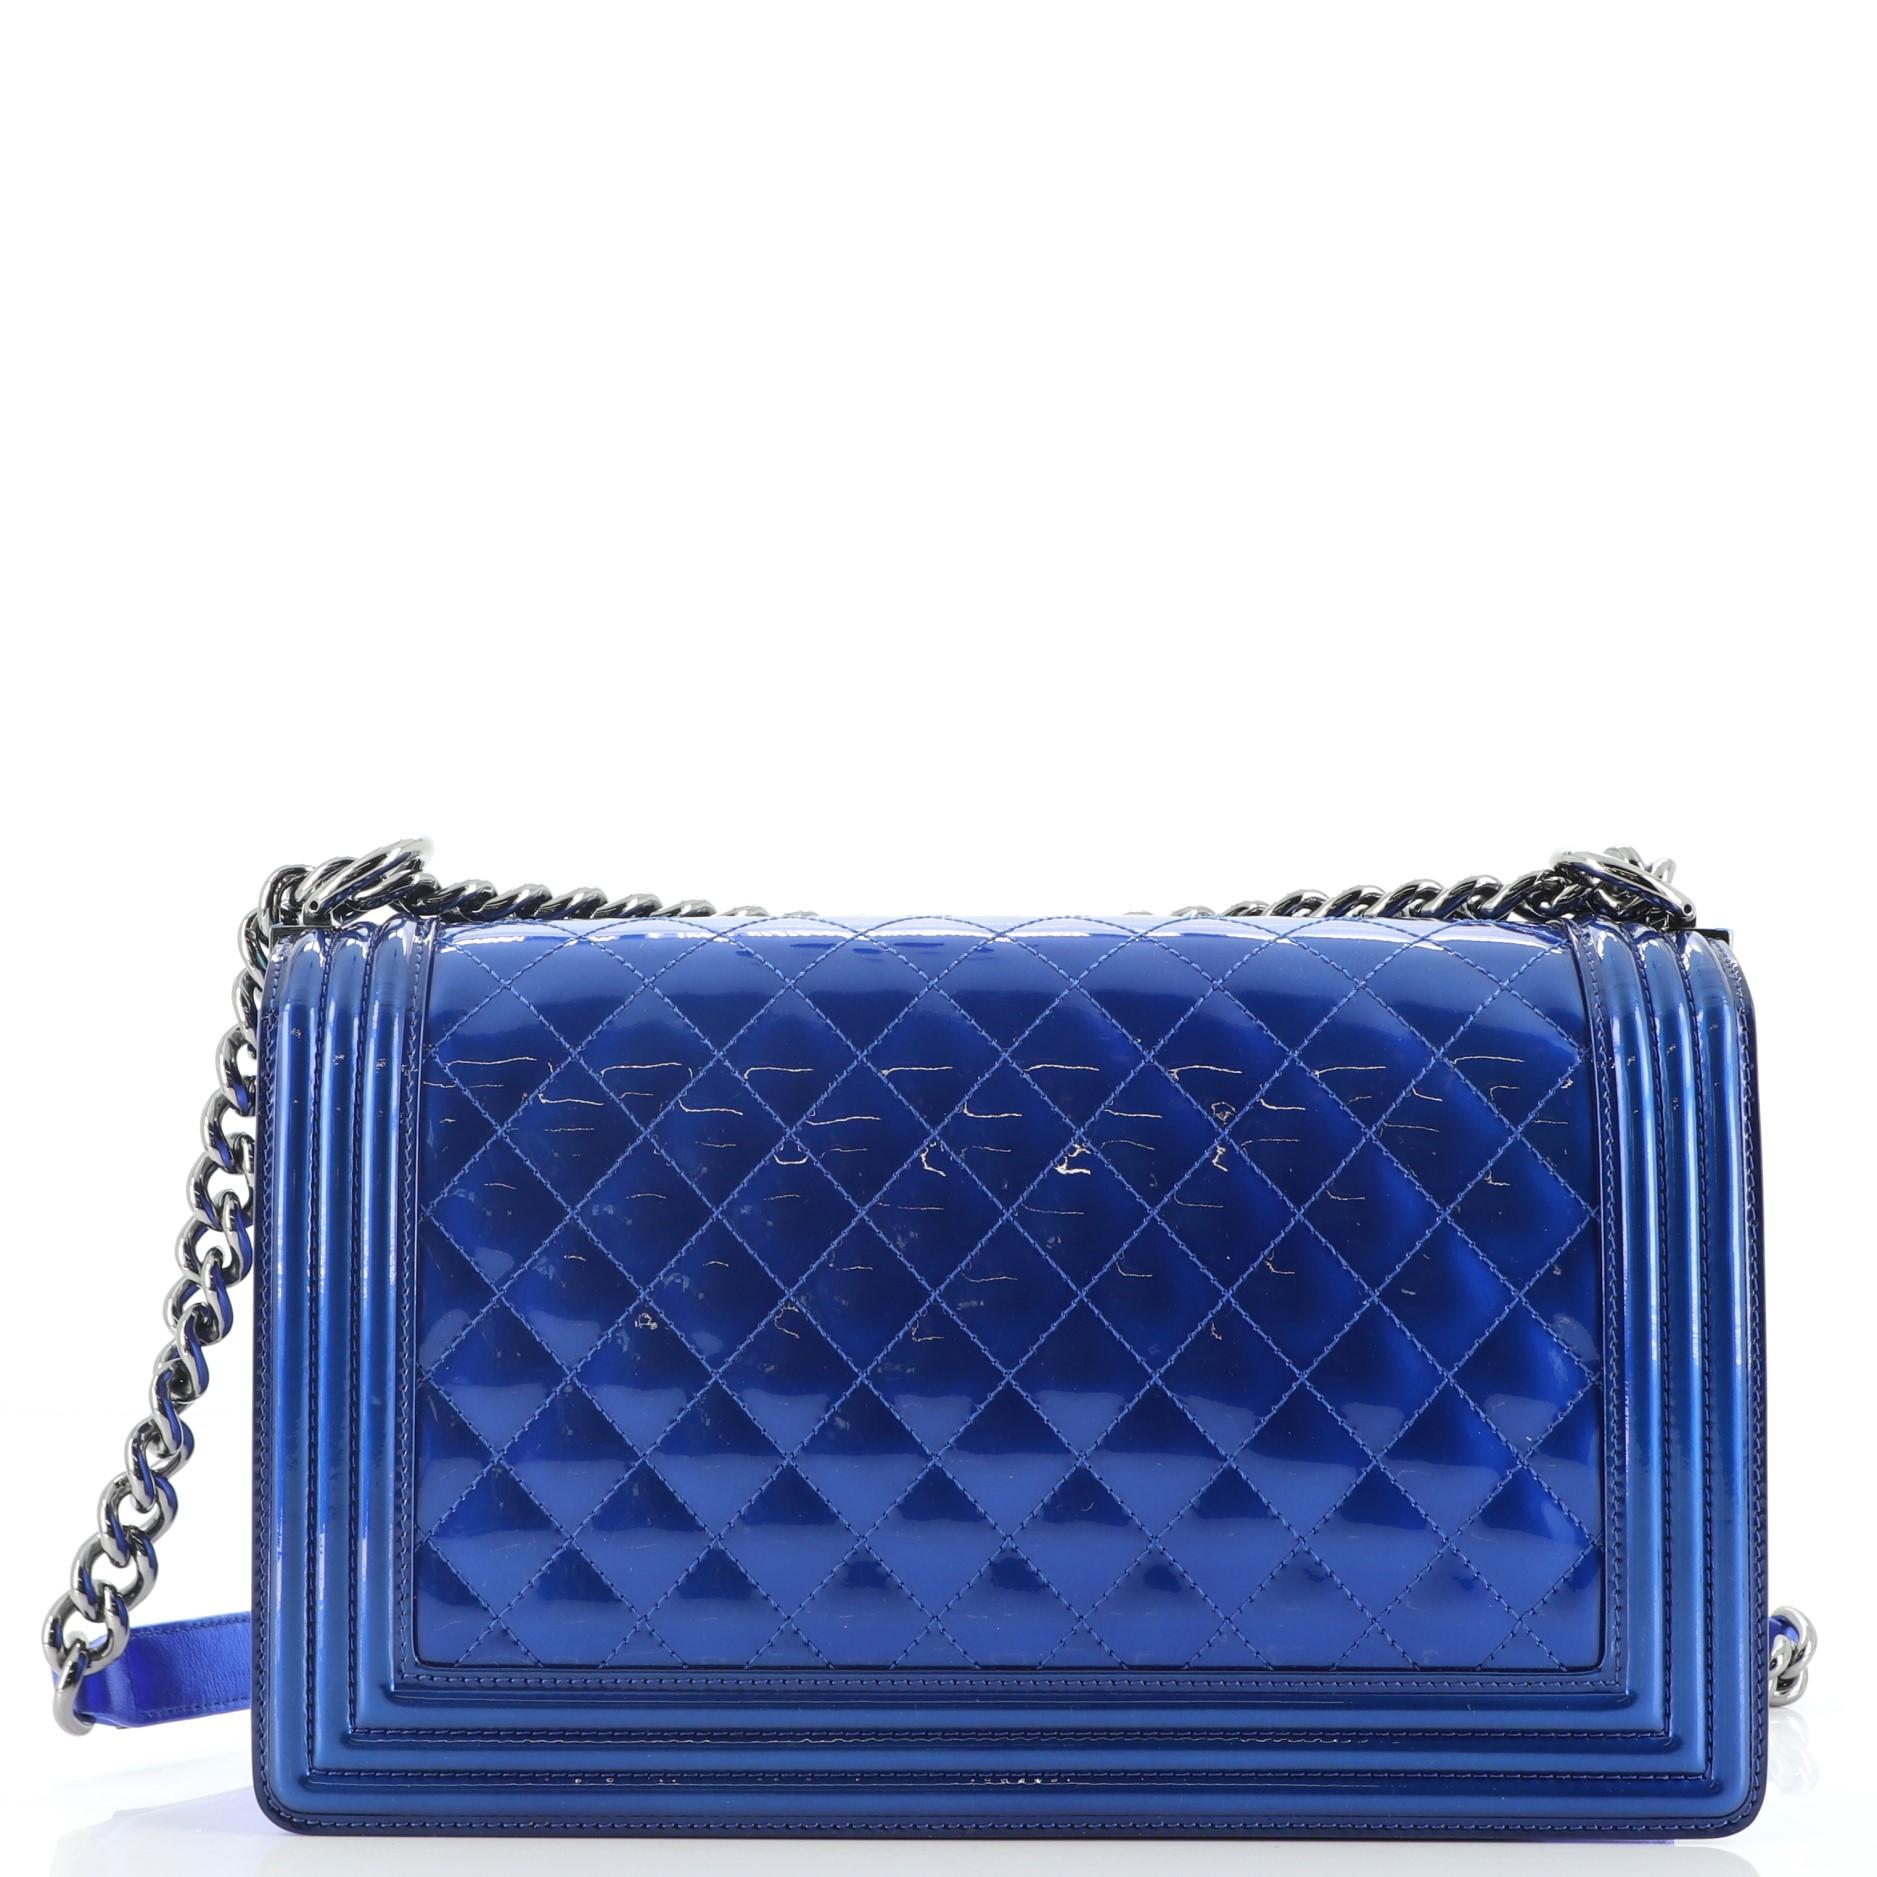 Blue Chanel Boy Flap Bag Quilted Patent New Medium